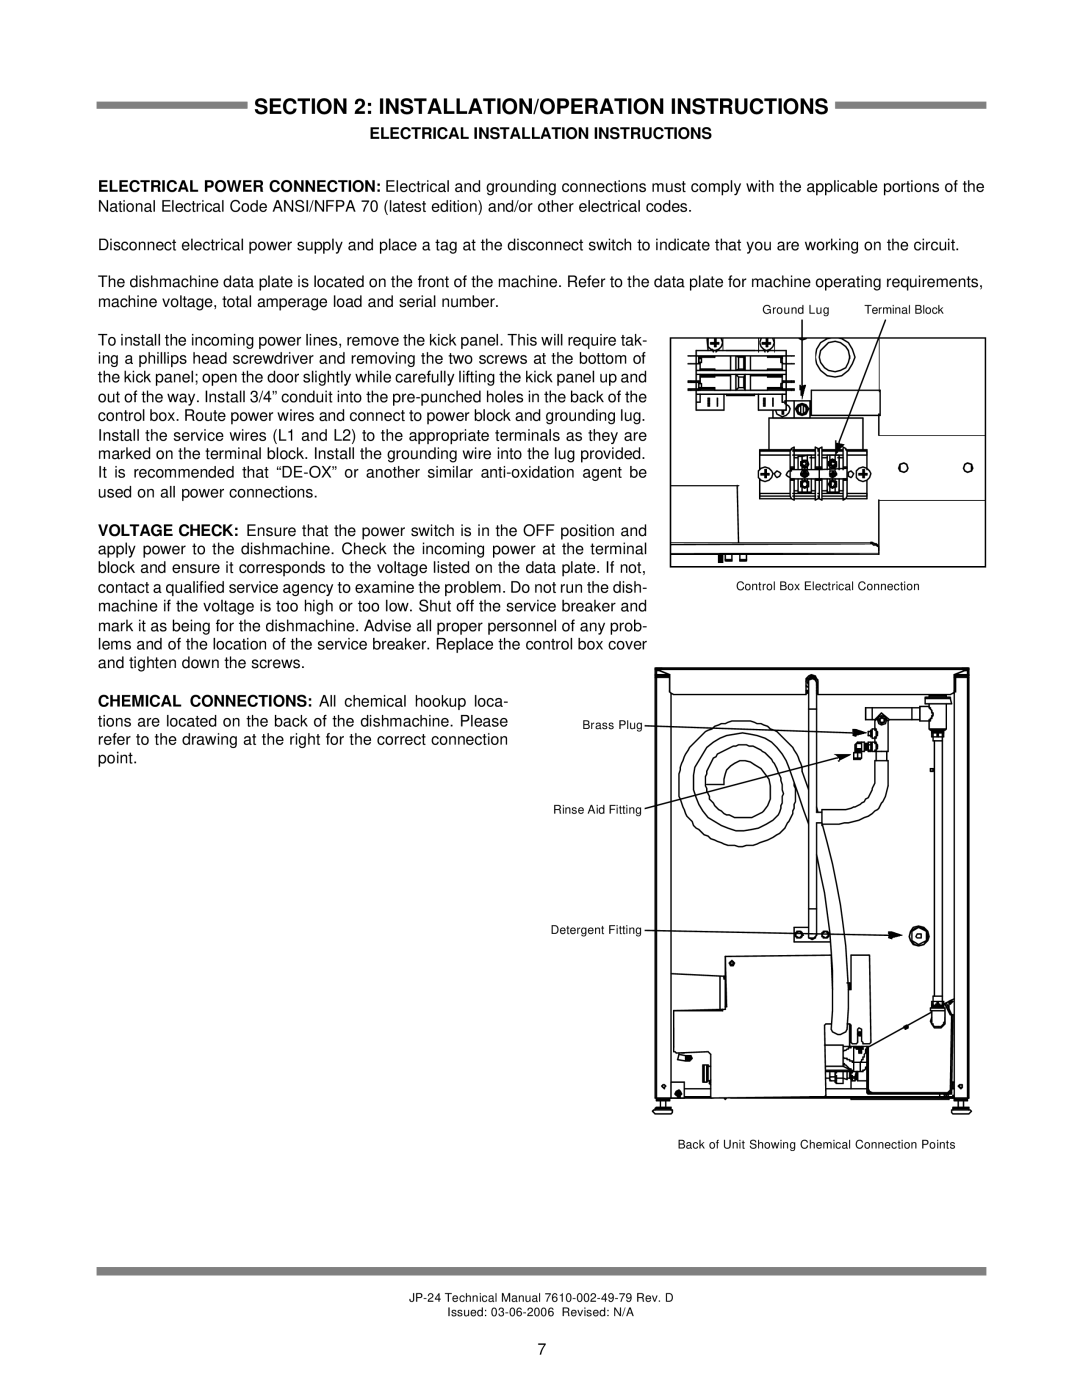 Jackson jp-24b, JP-24BF, JP-24F technical manual Electrical Installation Instructions, Installation/Operation Instructions 